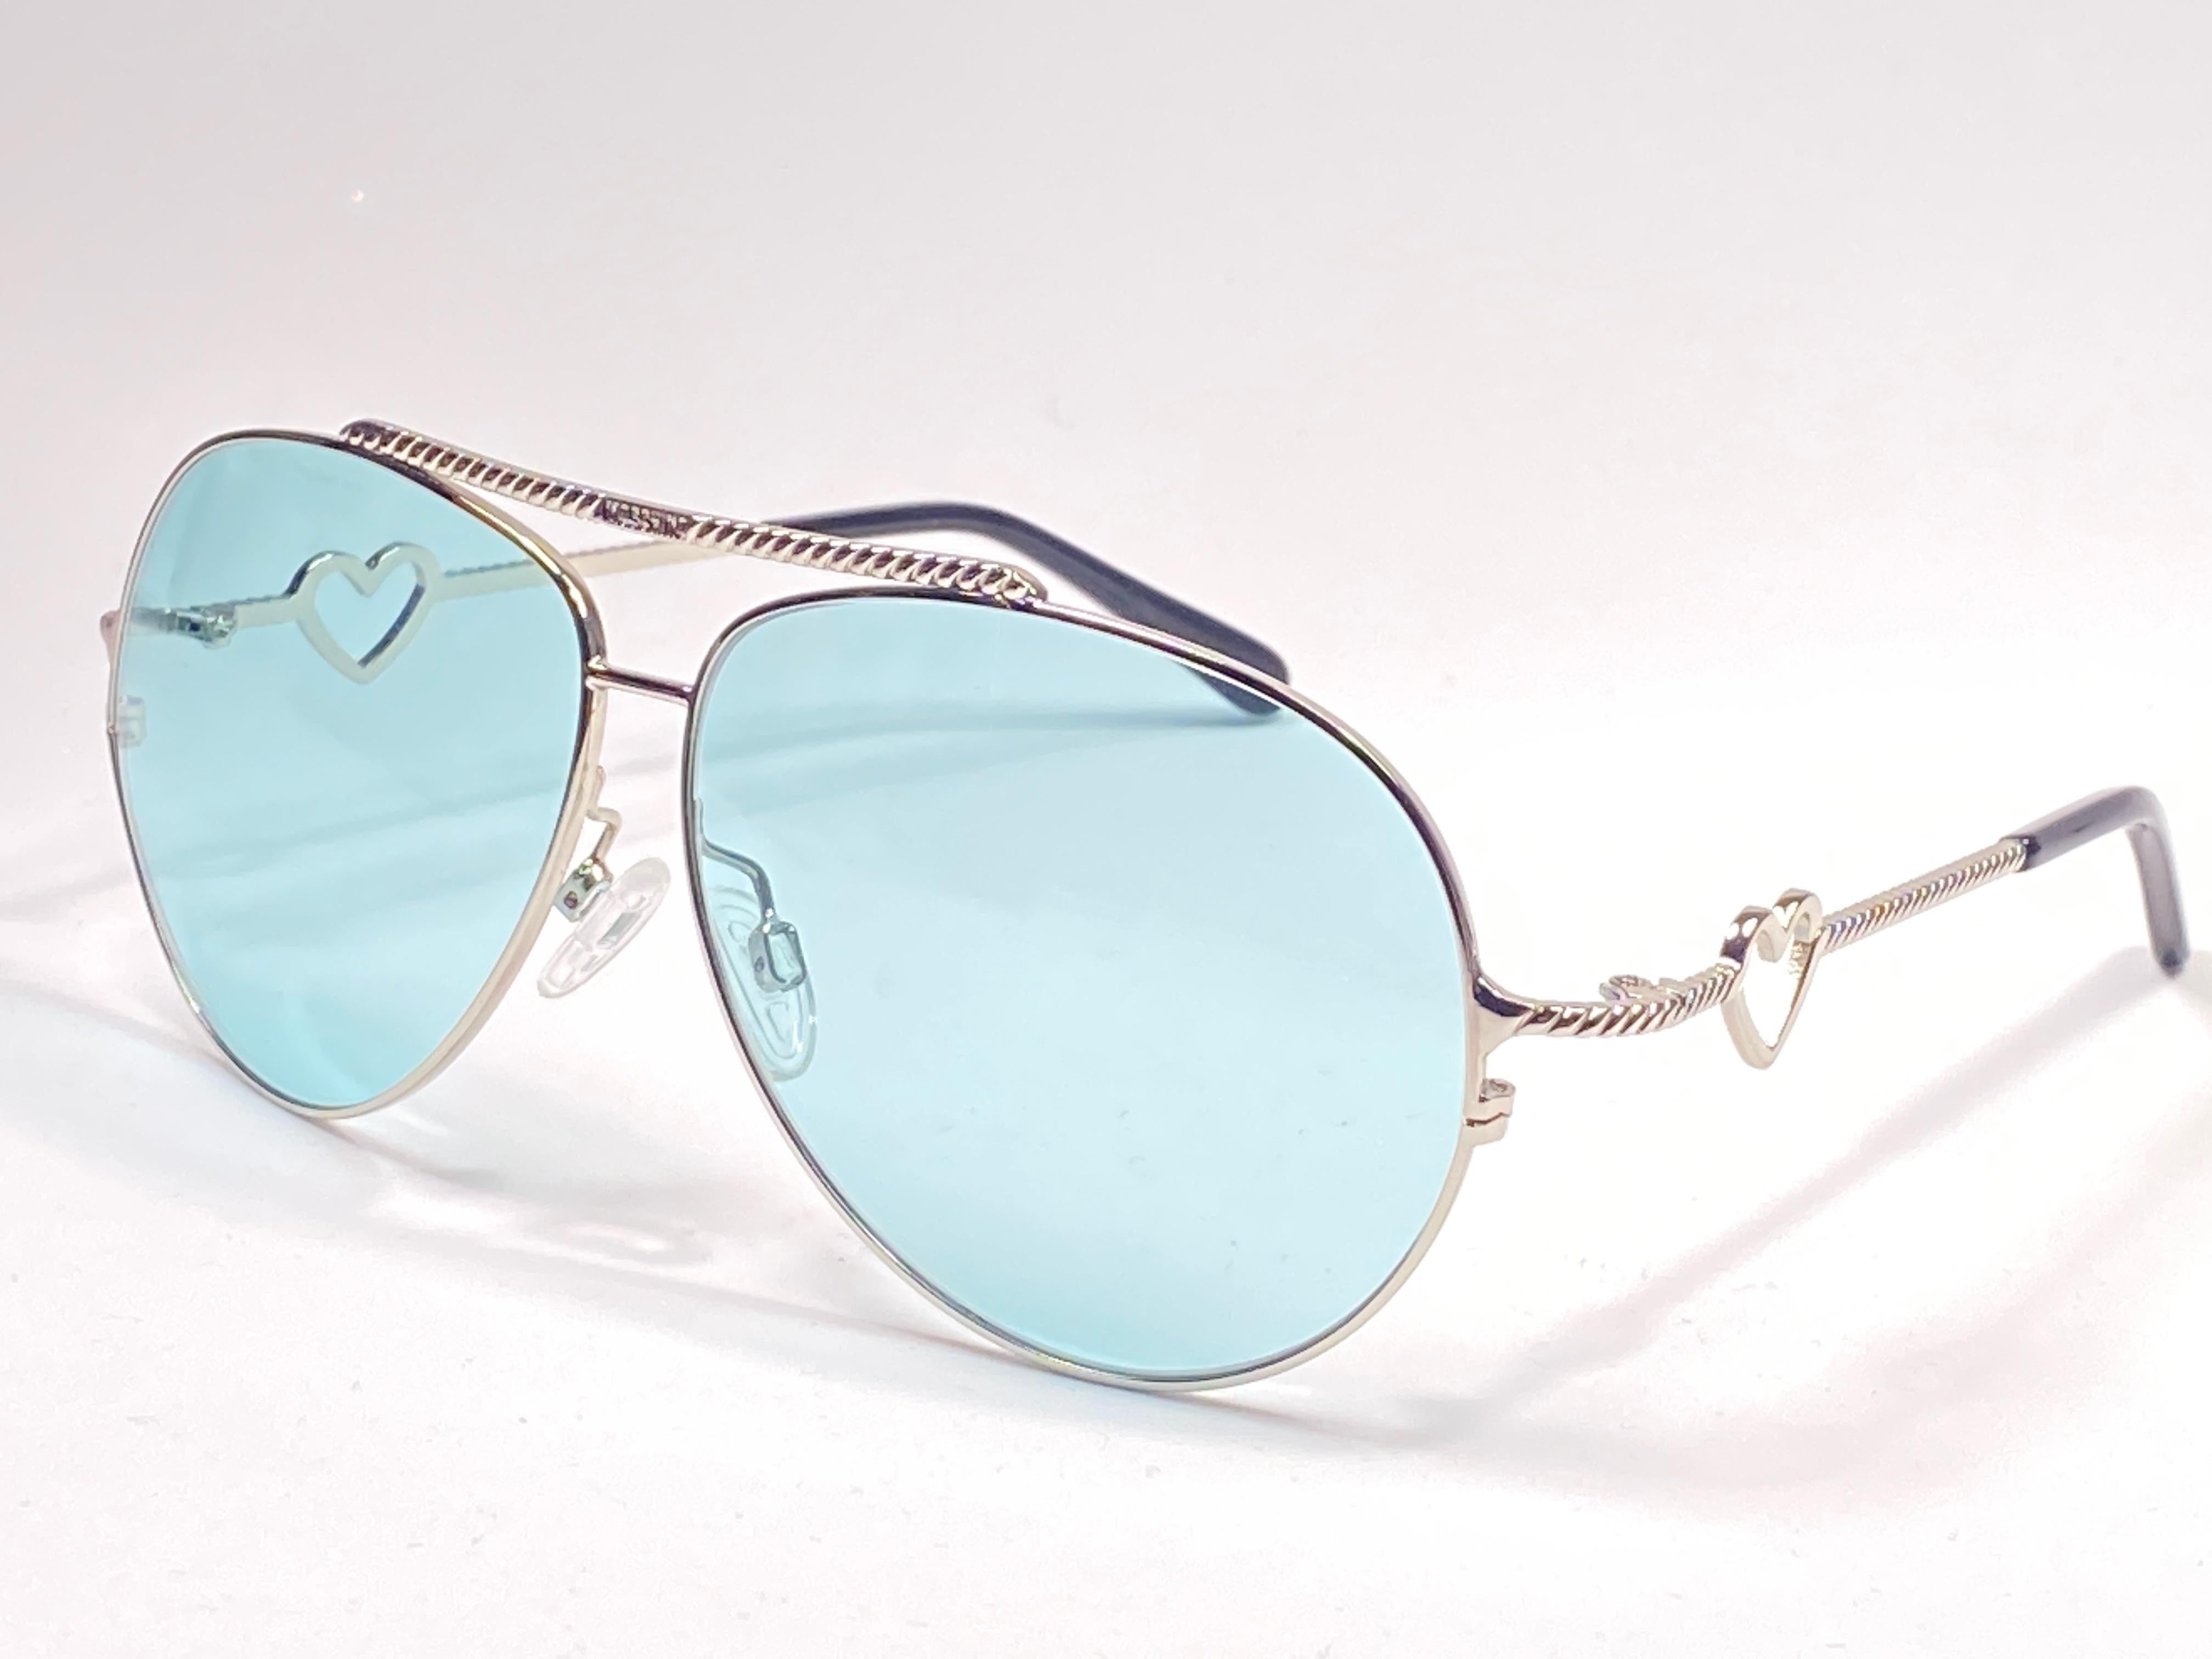 New Vintage Moschino with heart details frame. Spotless turquoise lenses.

Made in Italy.
 
Produced and design in 1990's.

This item may show minor sign of wear due to storage.